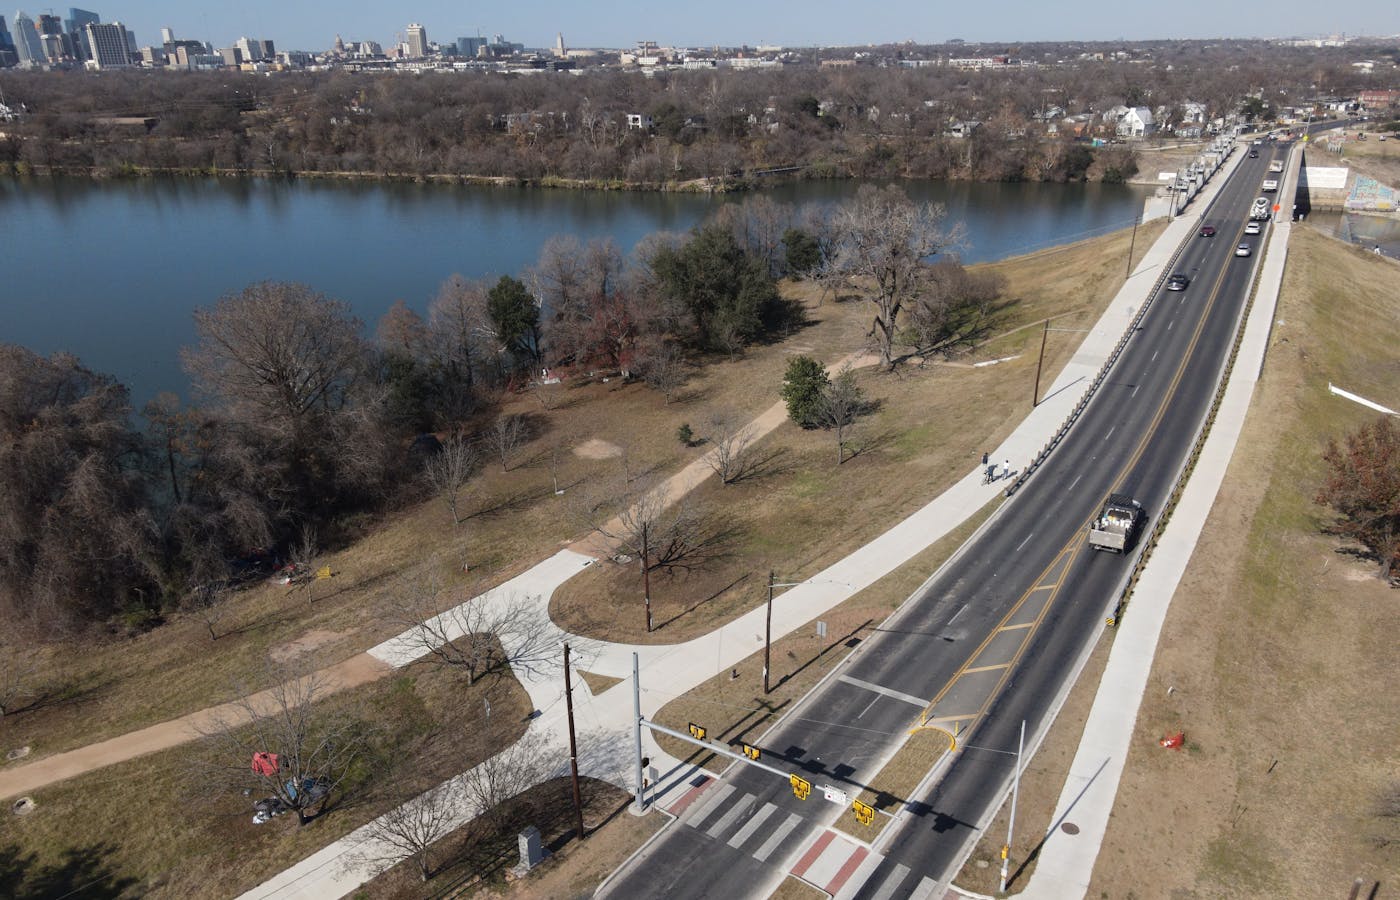 The Longhorn Dam Shared Use Path in Austin, Texas. (Photo courtesy of the Austin Department of Transportation)